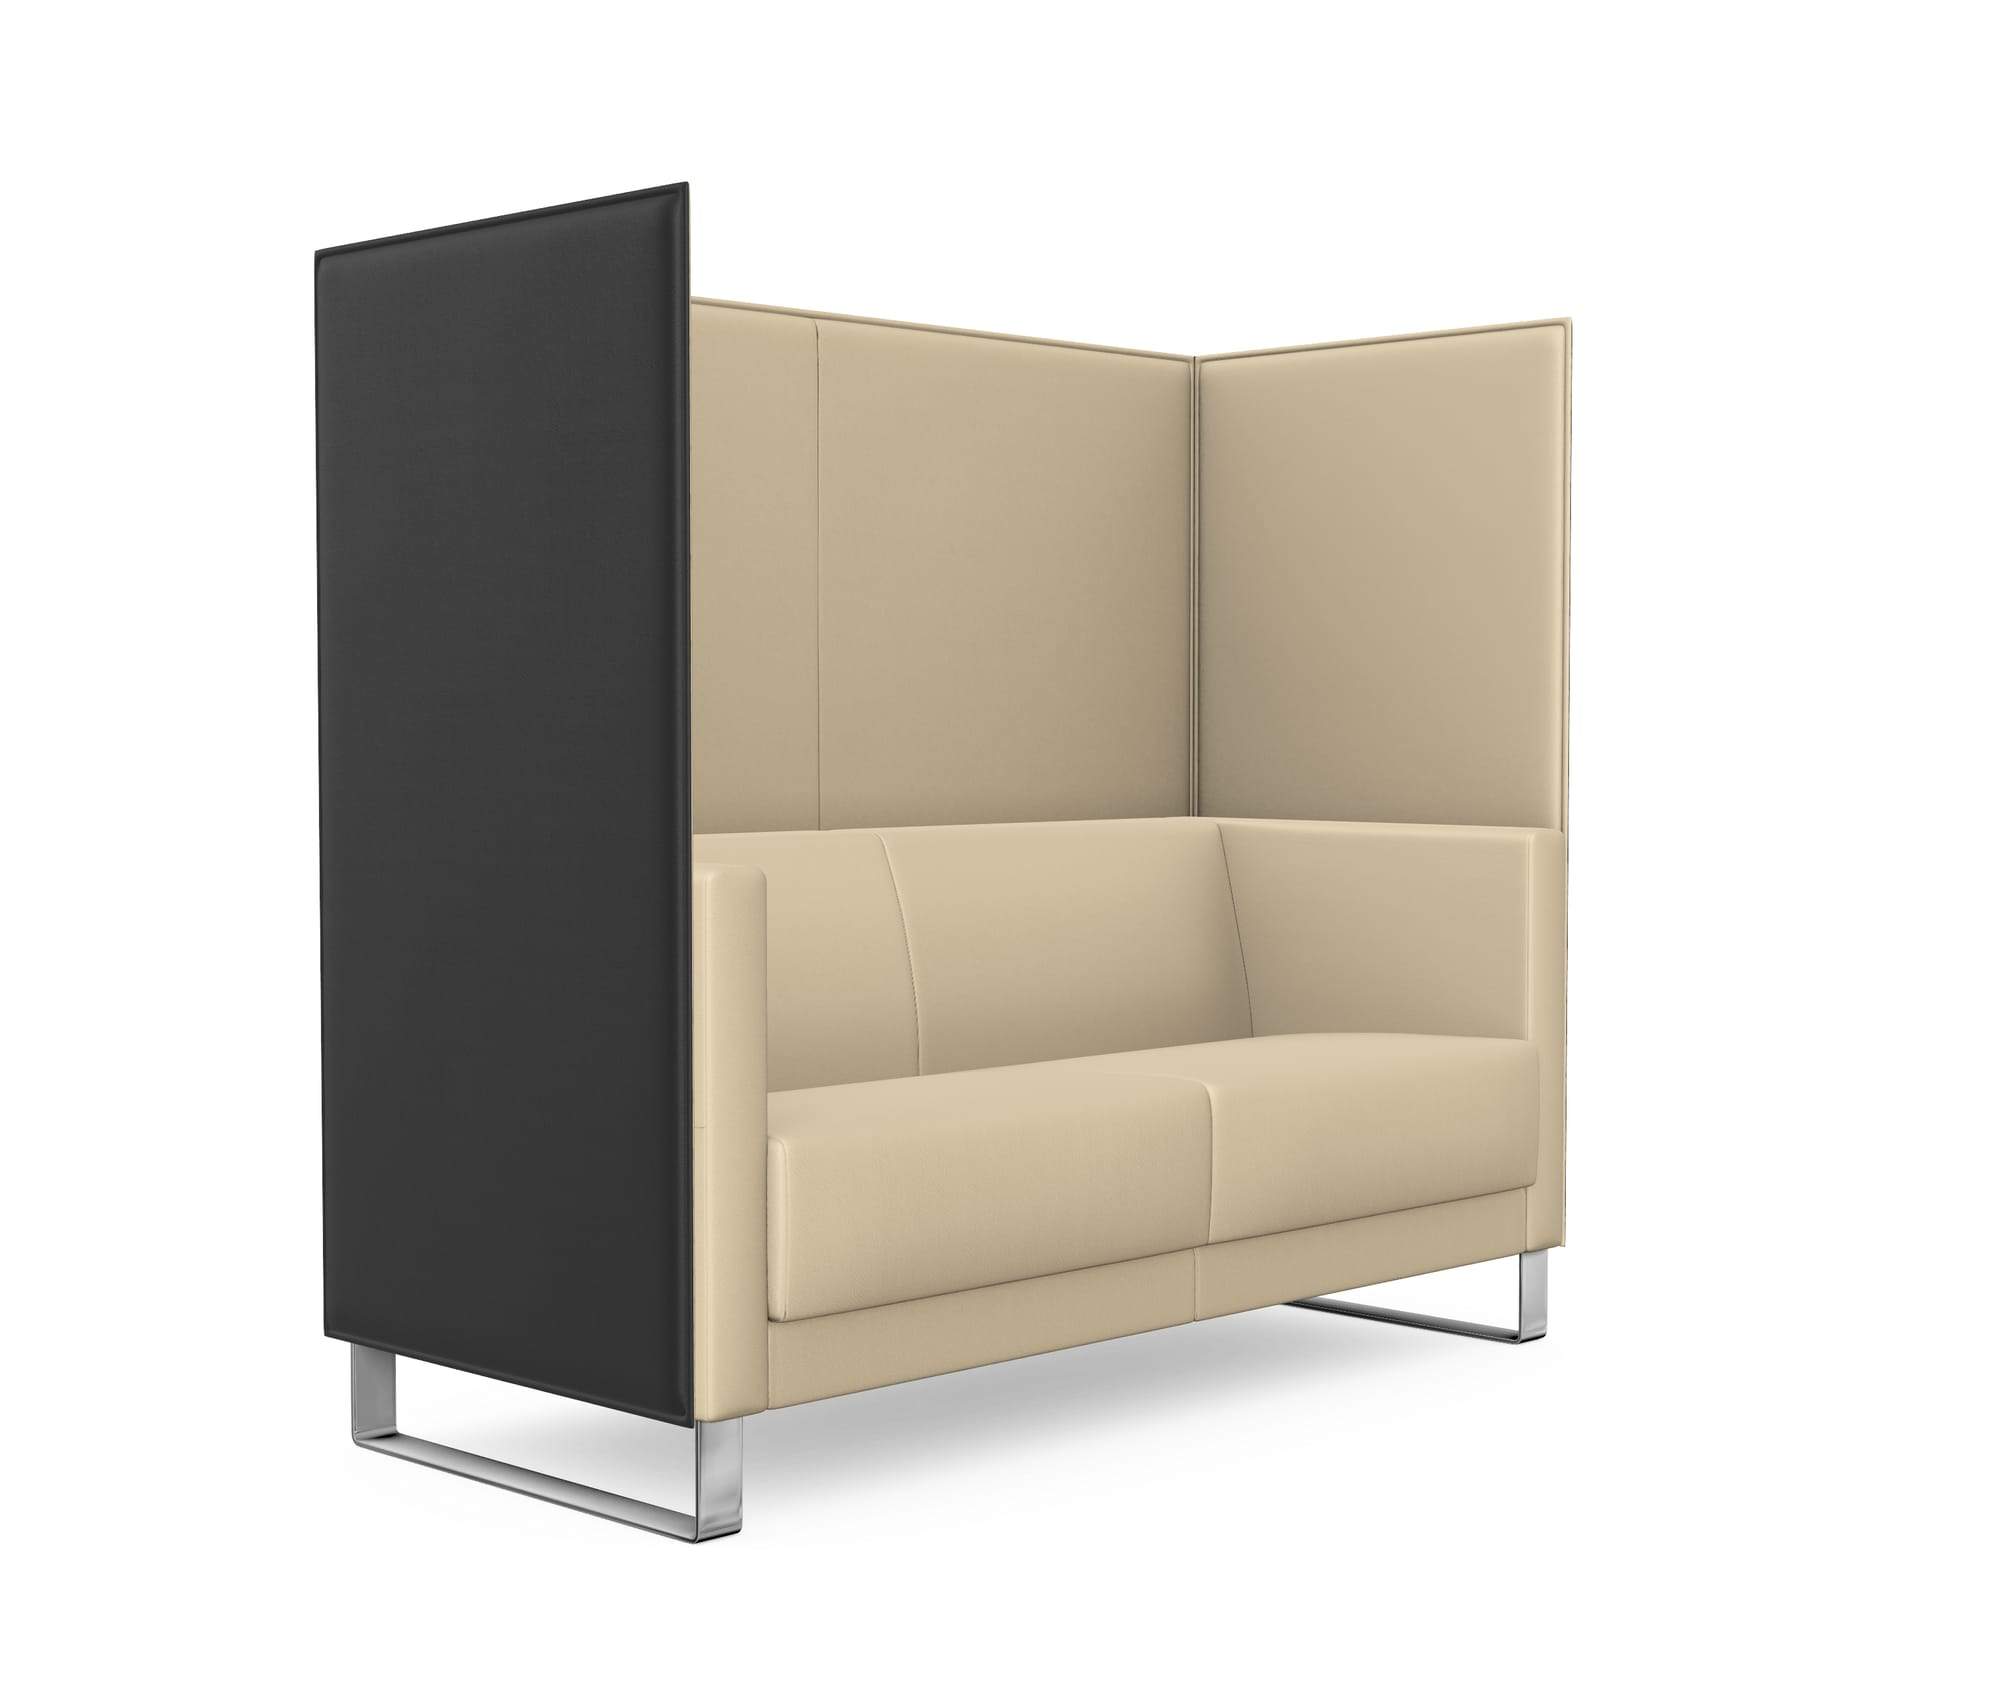 Vancouver Lite 2.5-Seat Sofa with Partition Walls